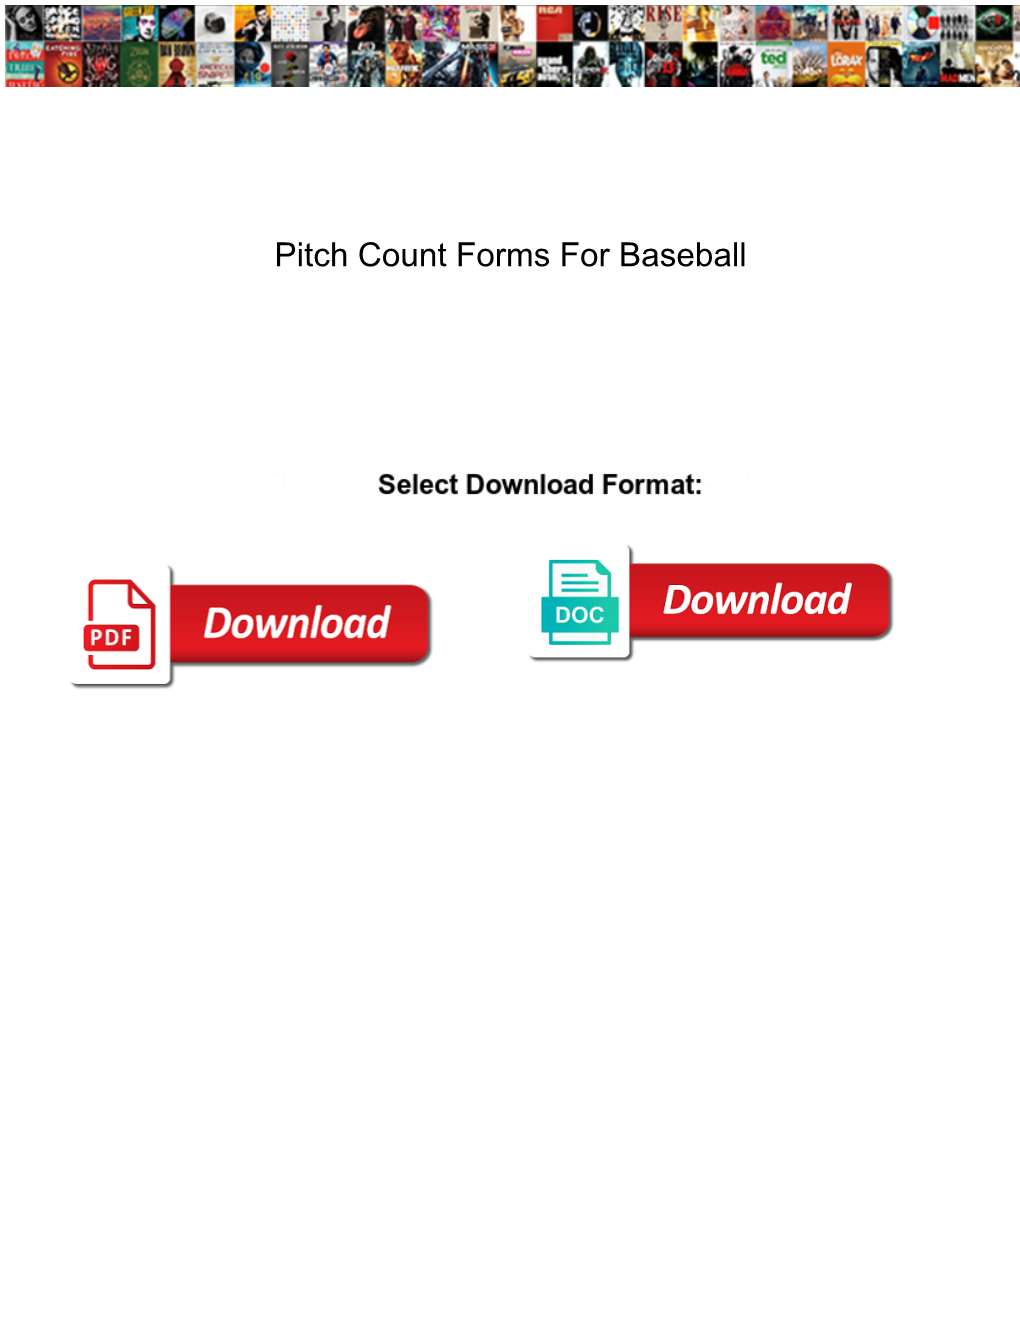 Pitch Count Forms for Baseball